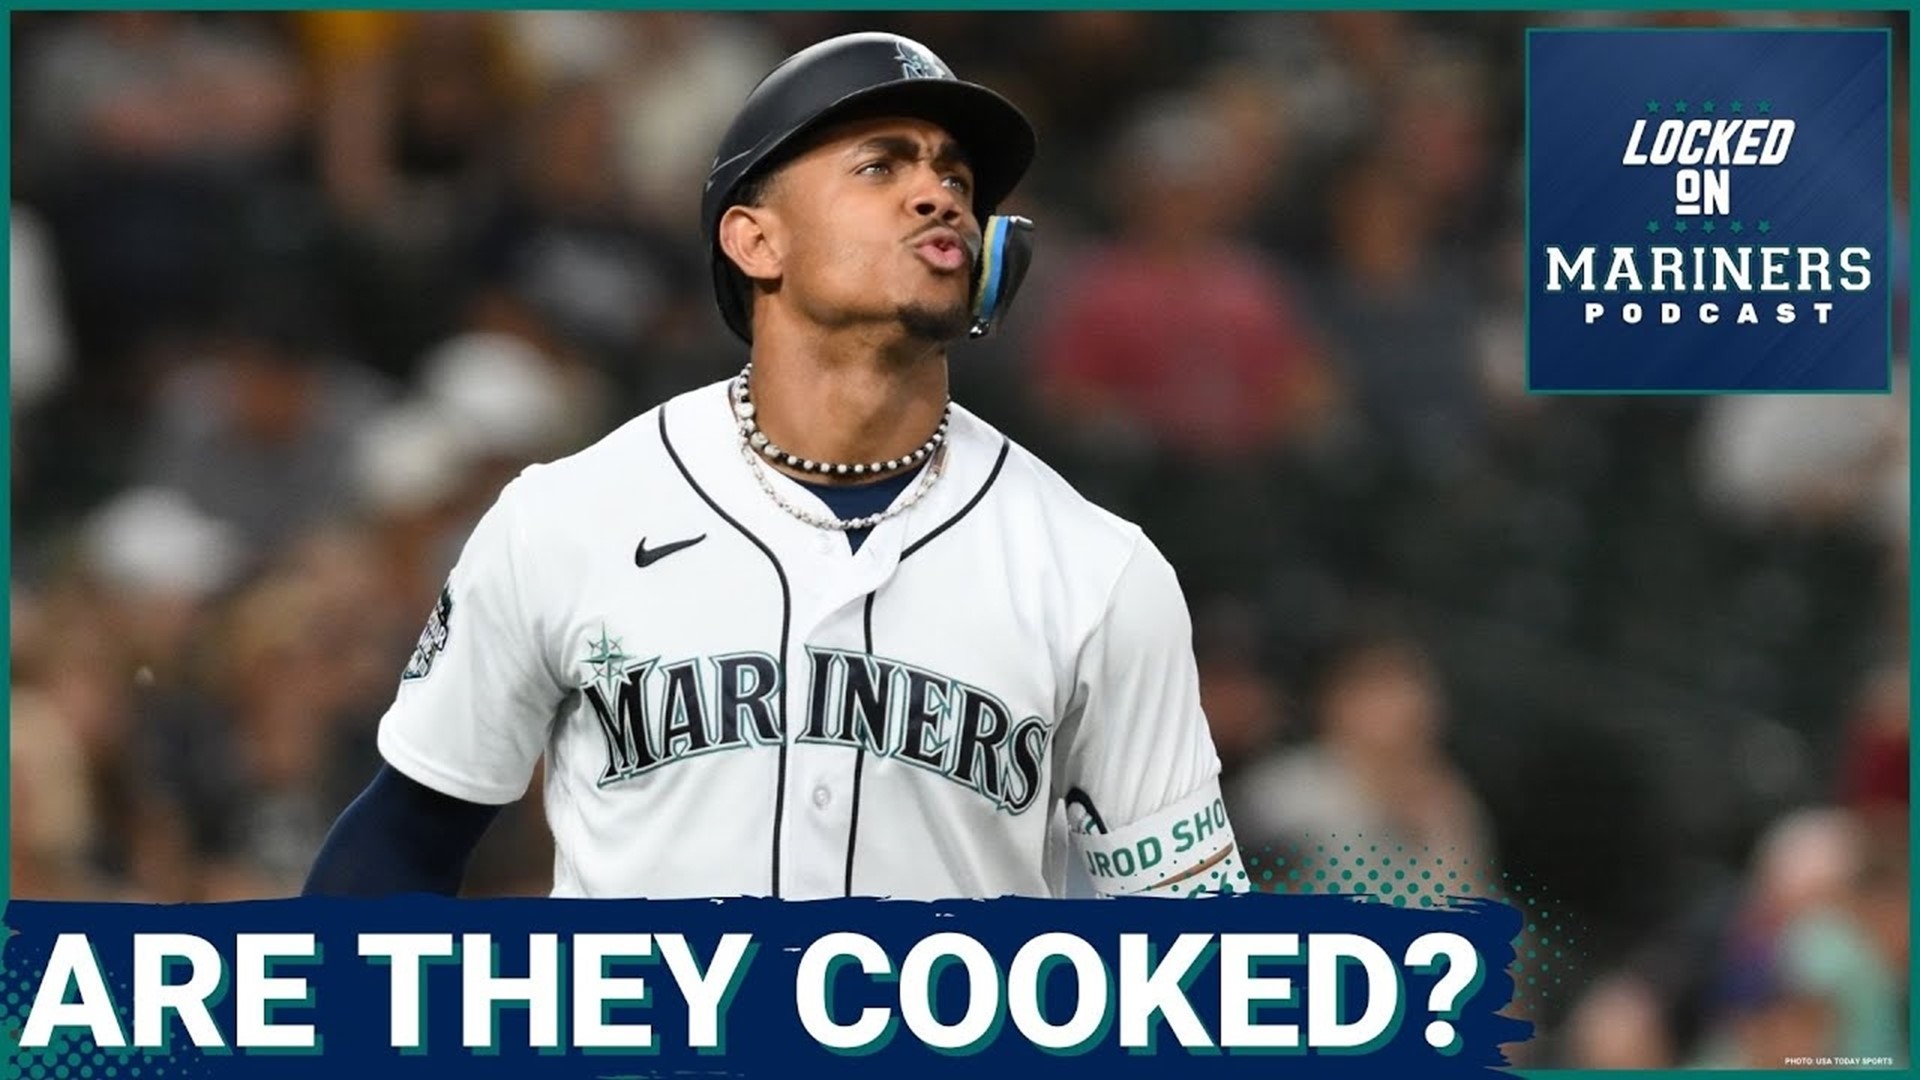 Colby and Ty discuss the Mariners' upcoming series with the Toronto Blue Jays, if Seattle's season can officially be deemed "over" after losing Jarred Kelenic.